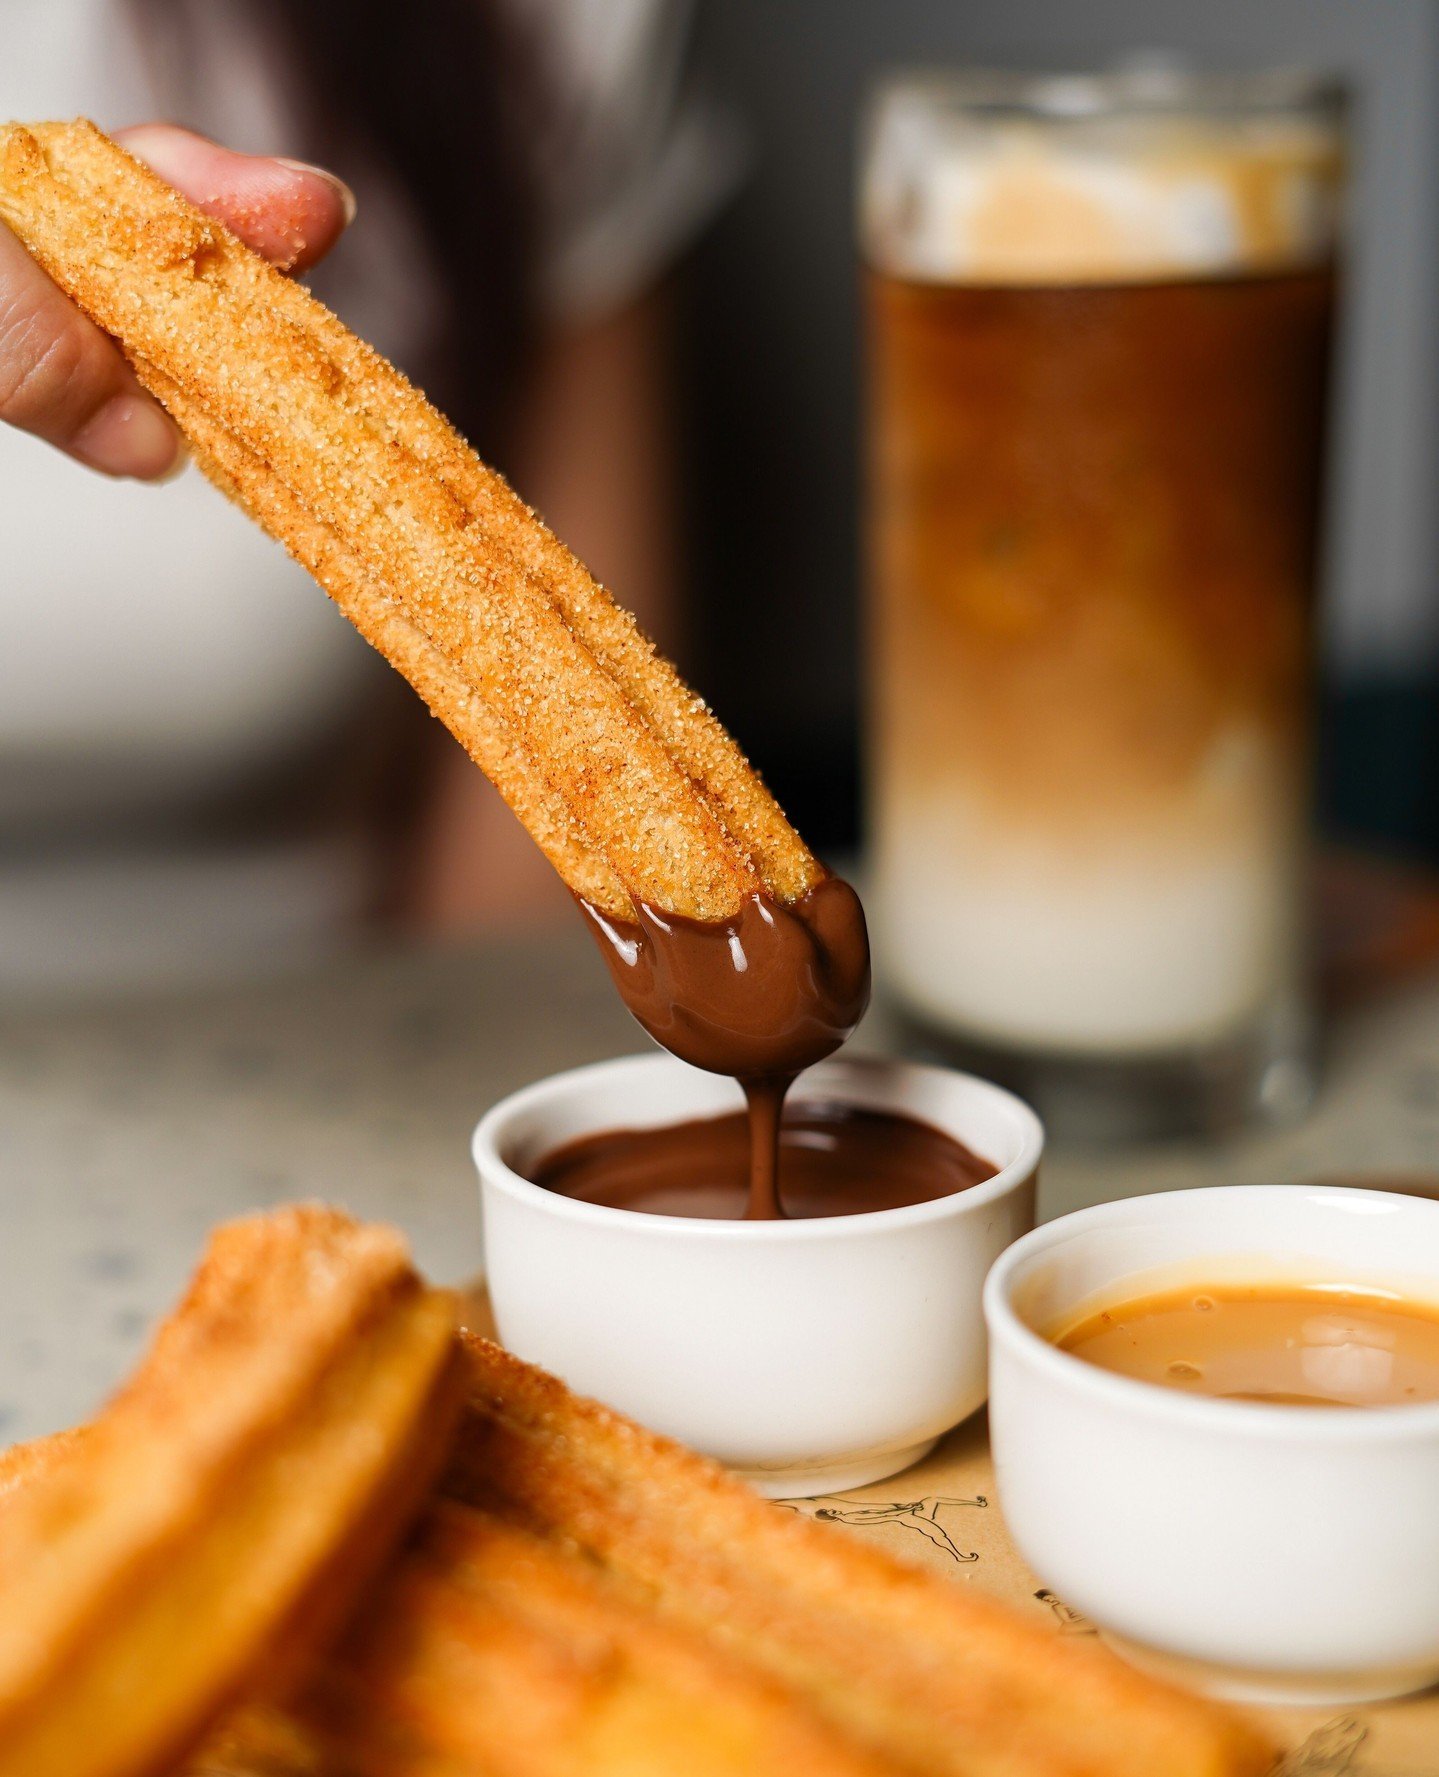 What better way to end a Mexican feast than with some incre&iacute;ble churros? 🫡⁠
⁠
Our Super Churros come served with a luxurious chocolate sauce and served alongside our velvety coconut dulce de leche. Dip em&rsquo;, lick em&rsquo; and let's get 